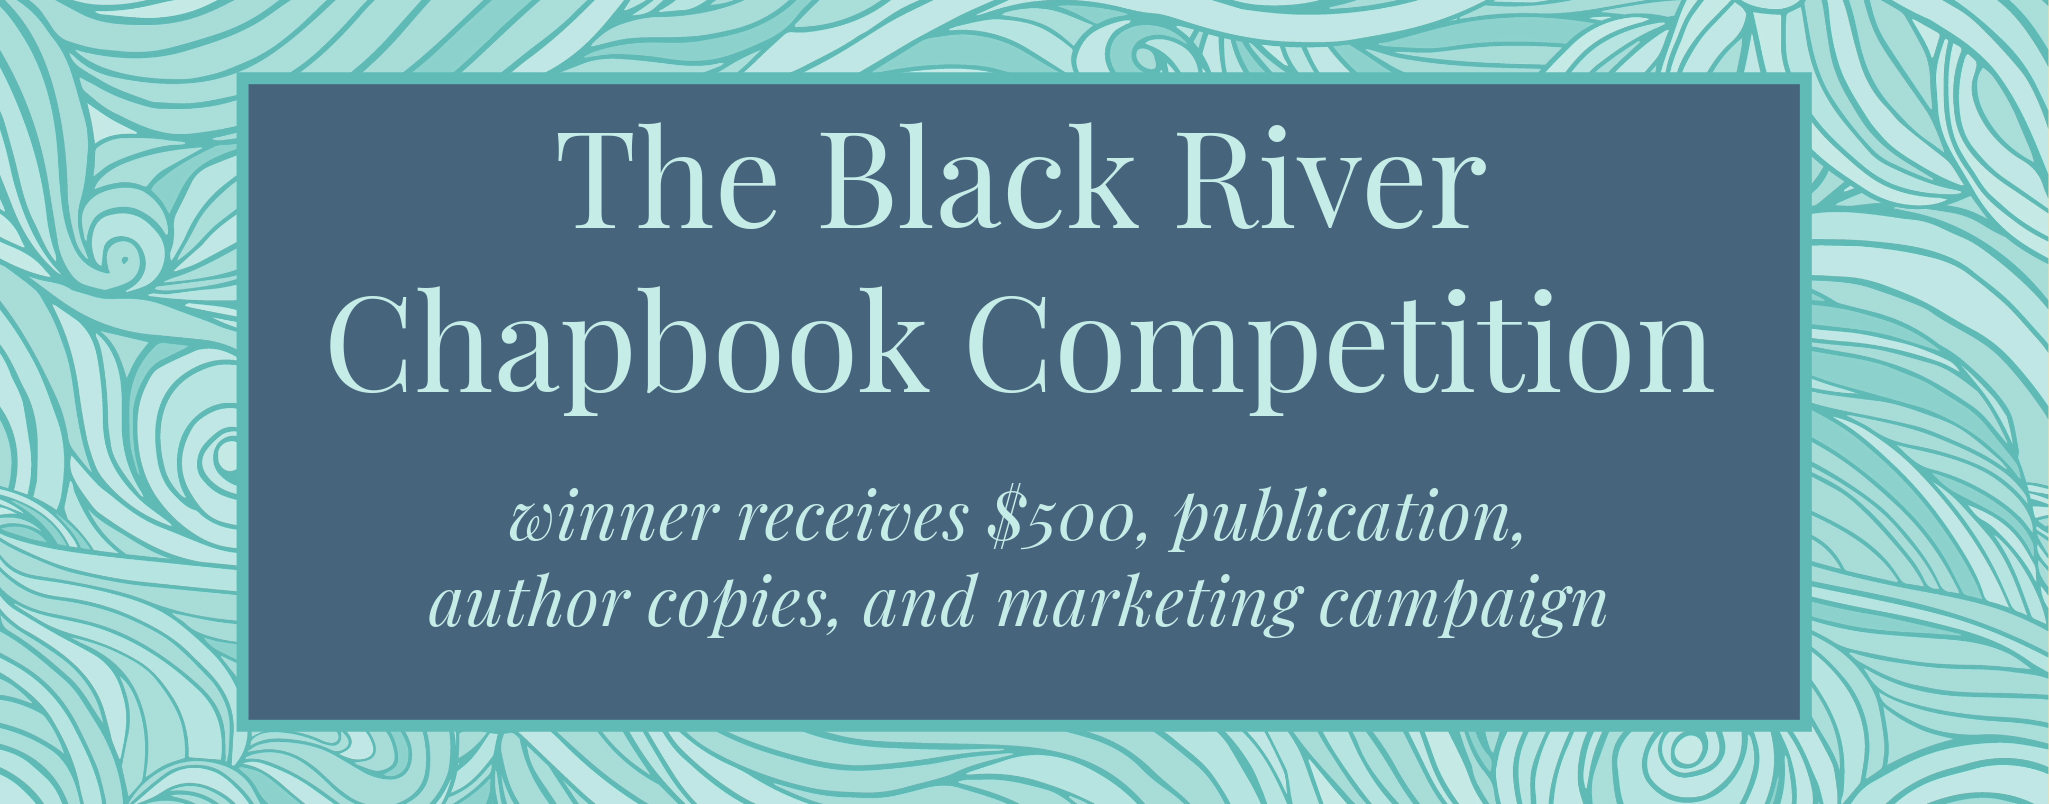 The Black River Chapbook Competition